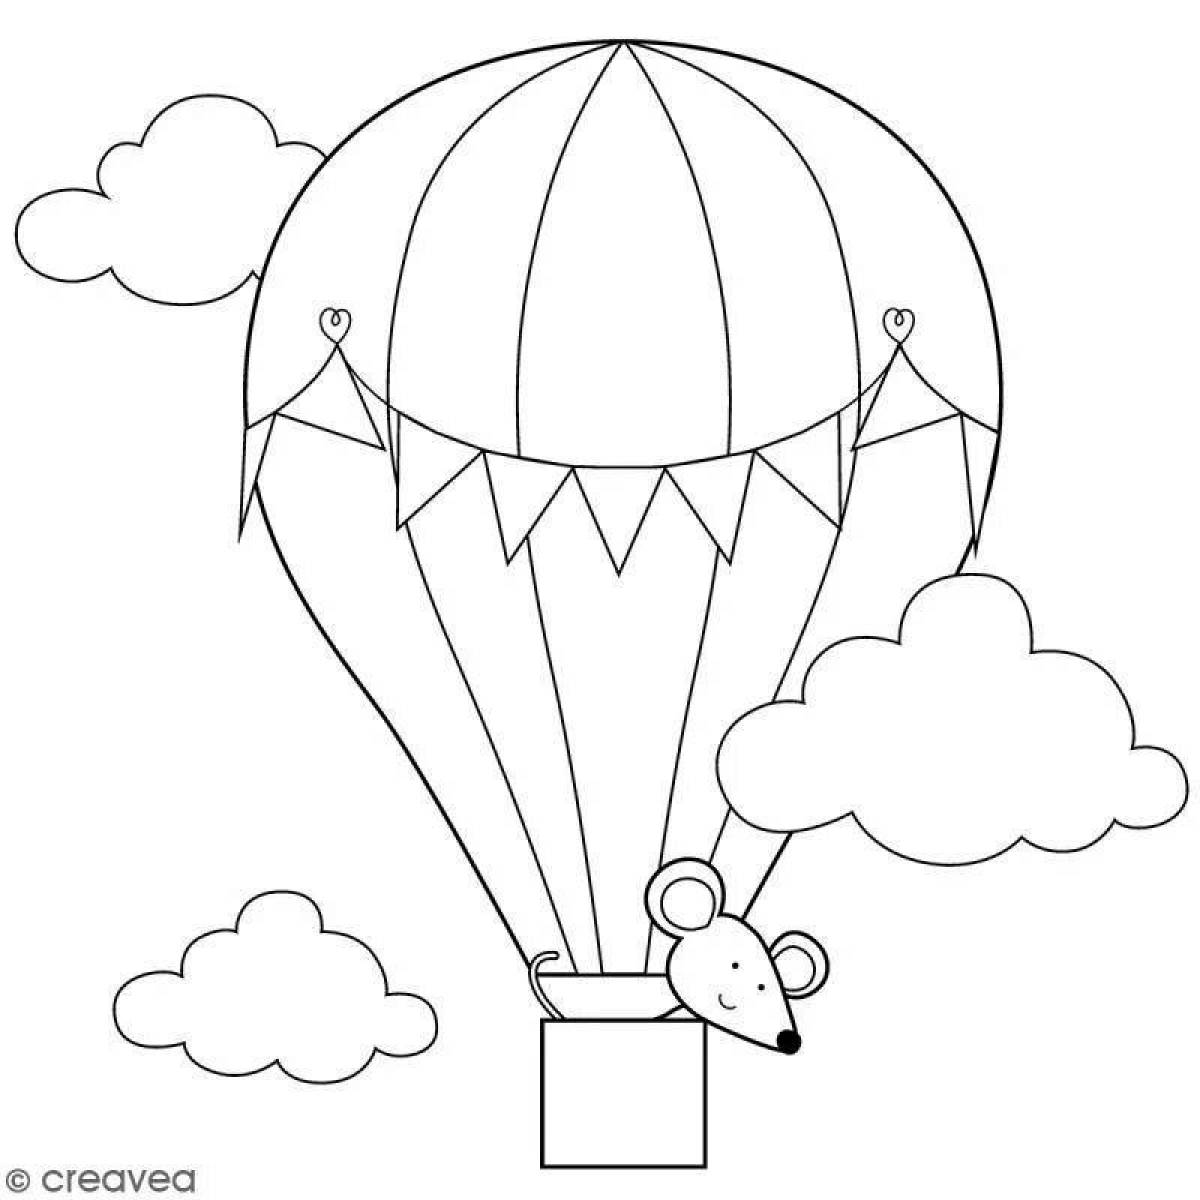 Coloring page whimsical balloon with a basket for children